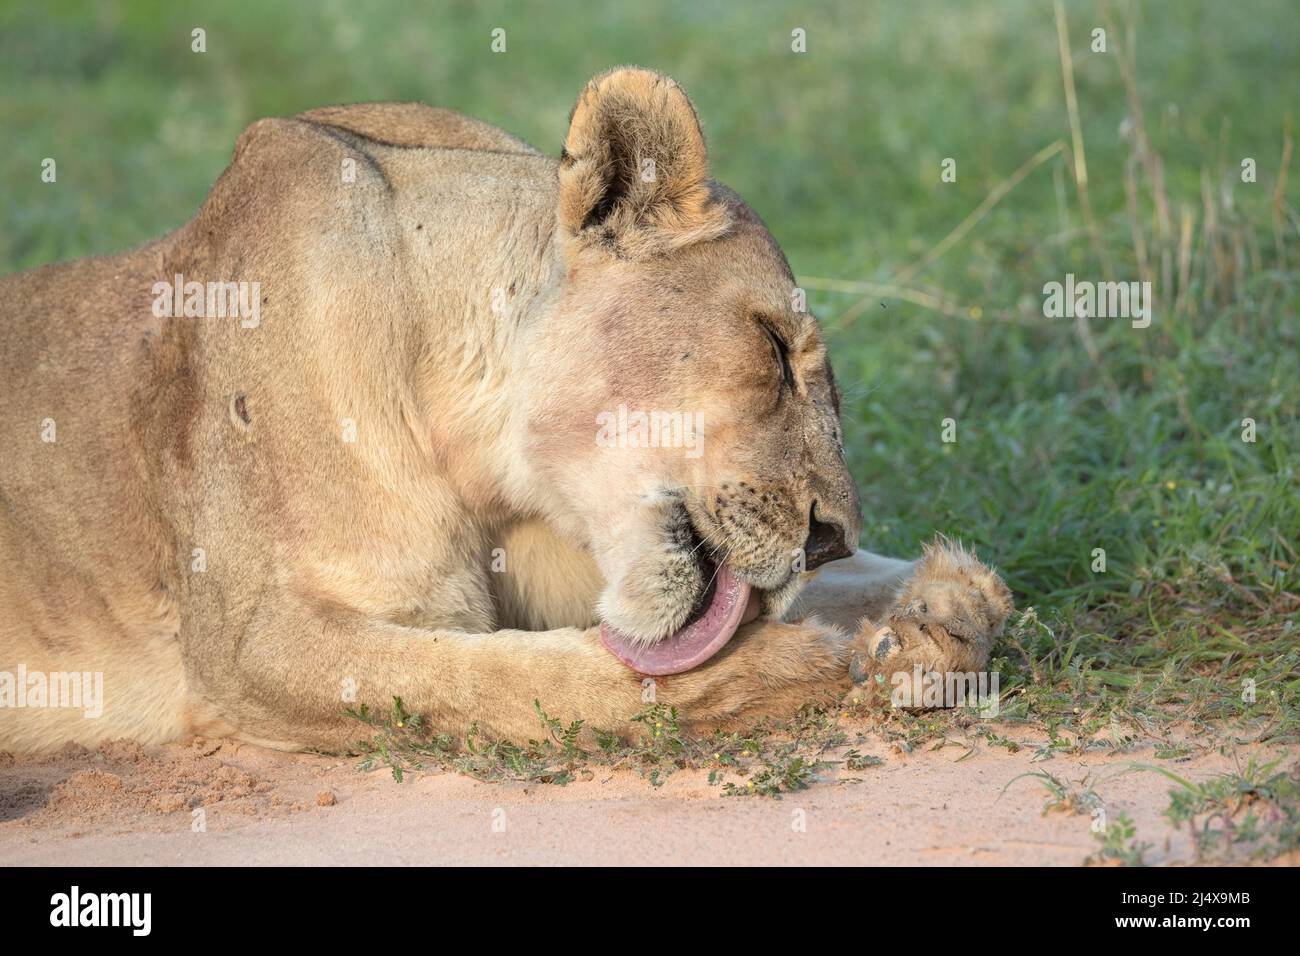 Lioness (Panthera leo) grooming, Kgalagadi transfrontier park, Northern Cape, South Africa Stock Photo